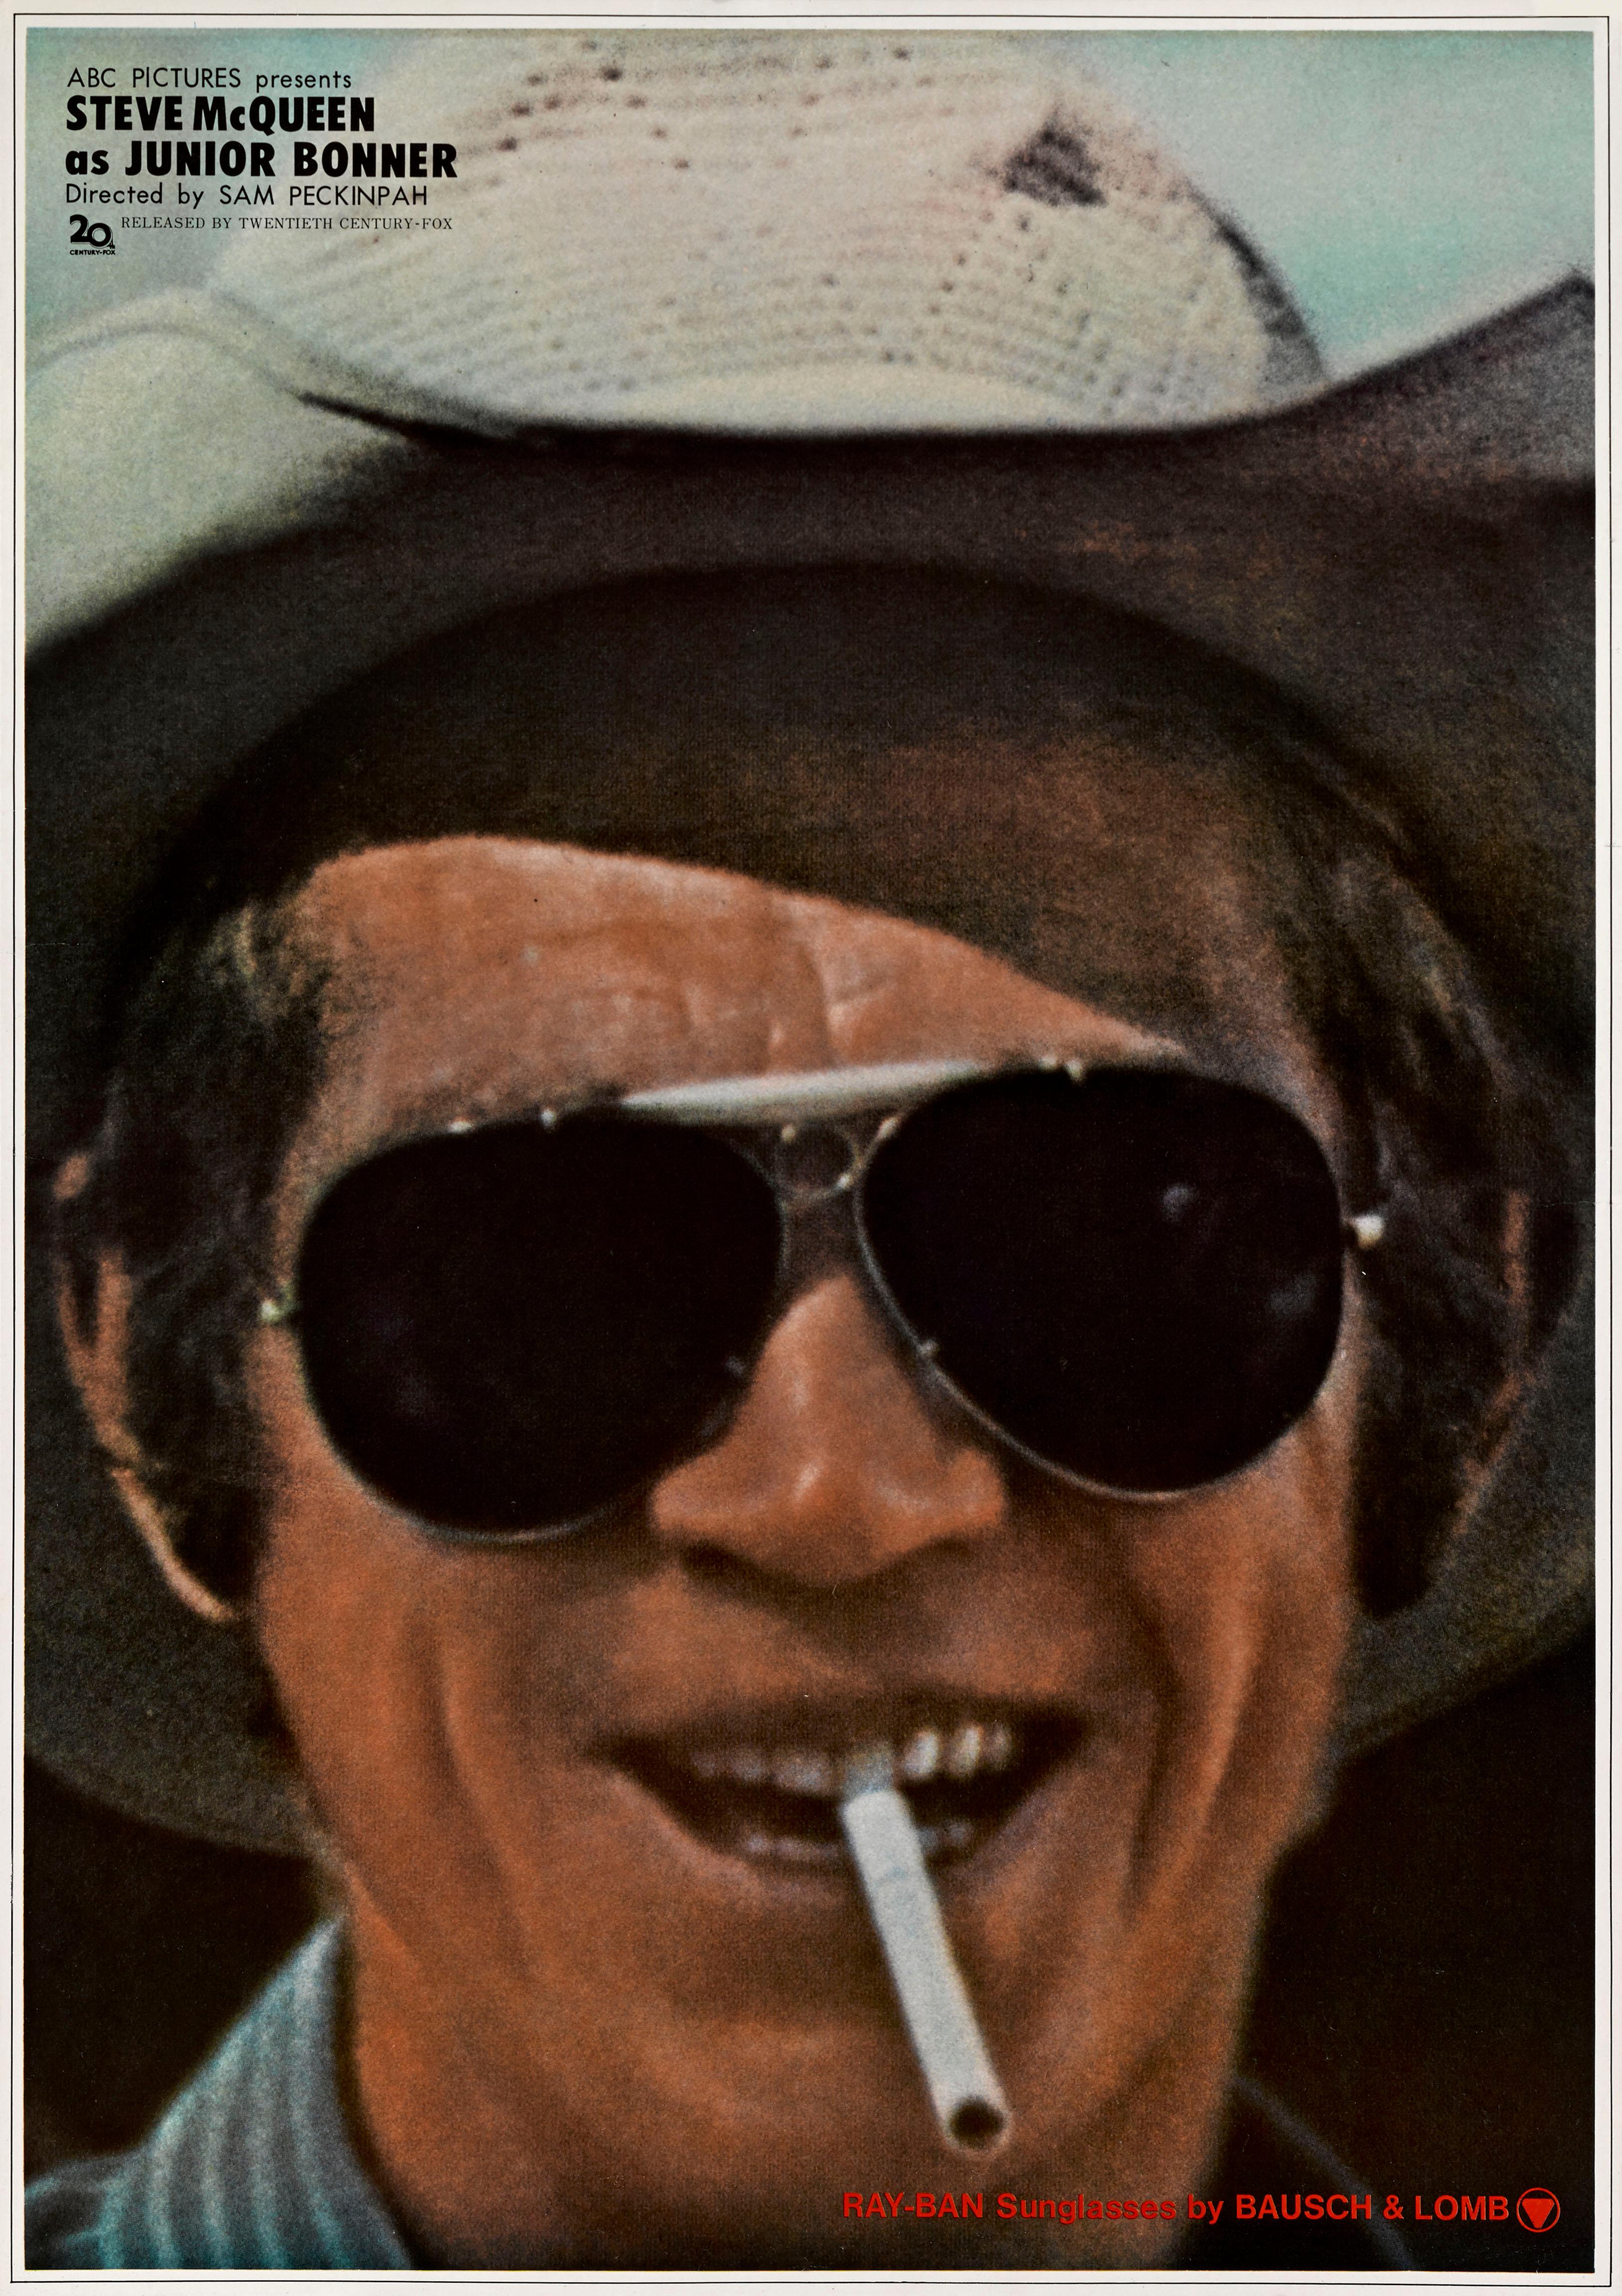 Original Japanese film poster for the 1972 western, drama Junior Bonner.
This film was directed by Sam Peckinpah and starred Steve McQueen, Robert Preston, Ida Lupino.
This poster is conservation linen backed and it would be shipped rolled in a